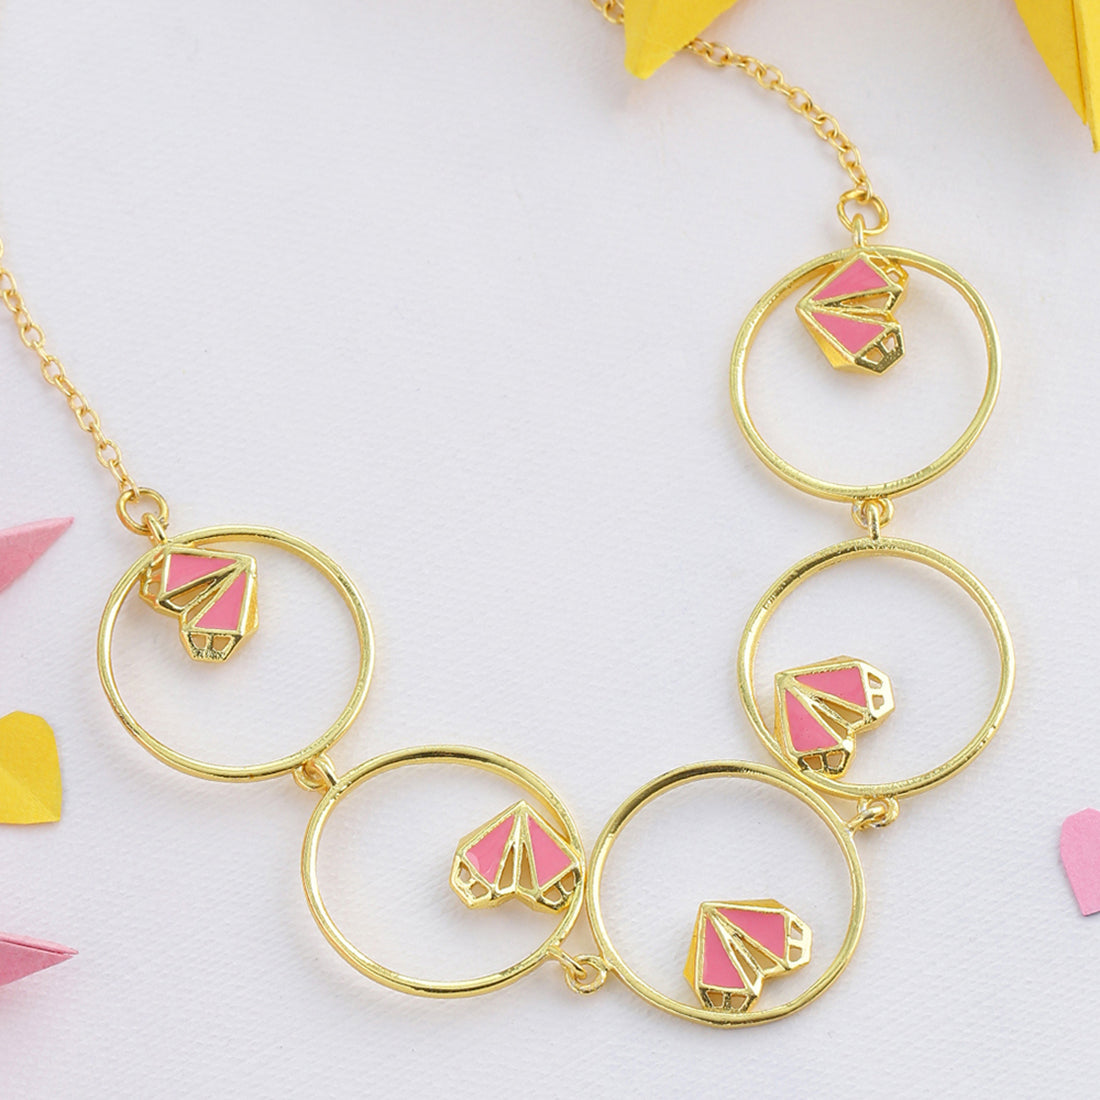 Mi Amore Hearts in Circles Necklace